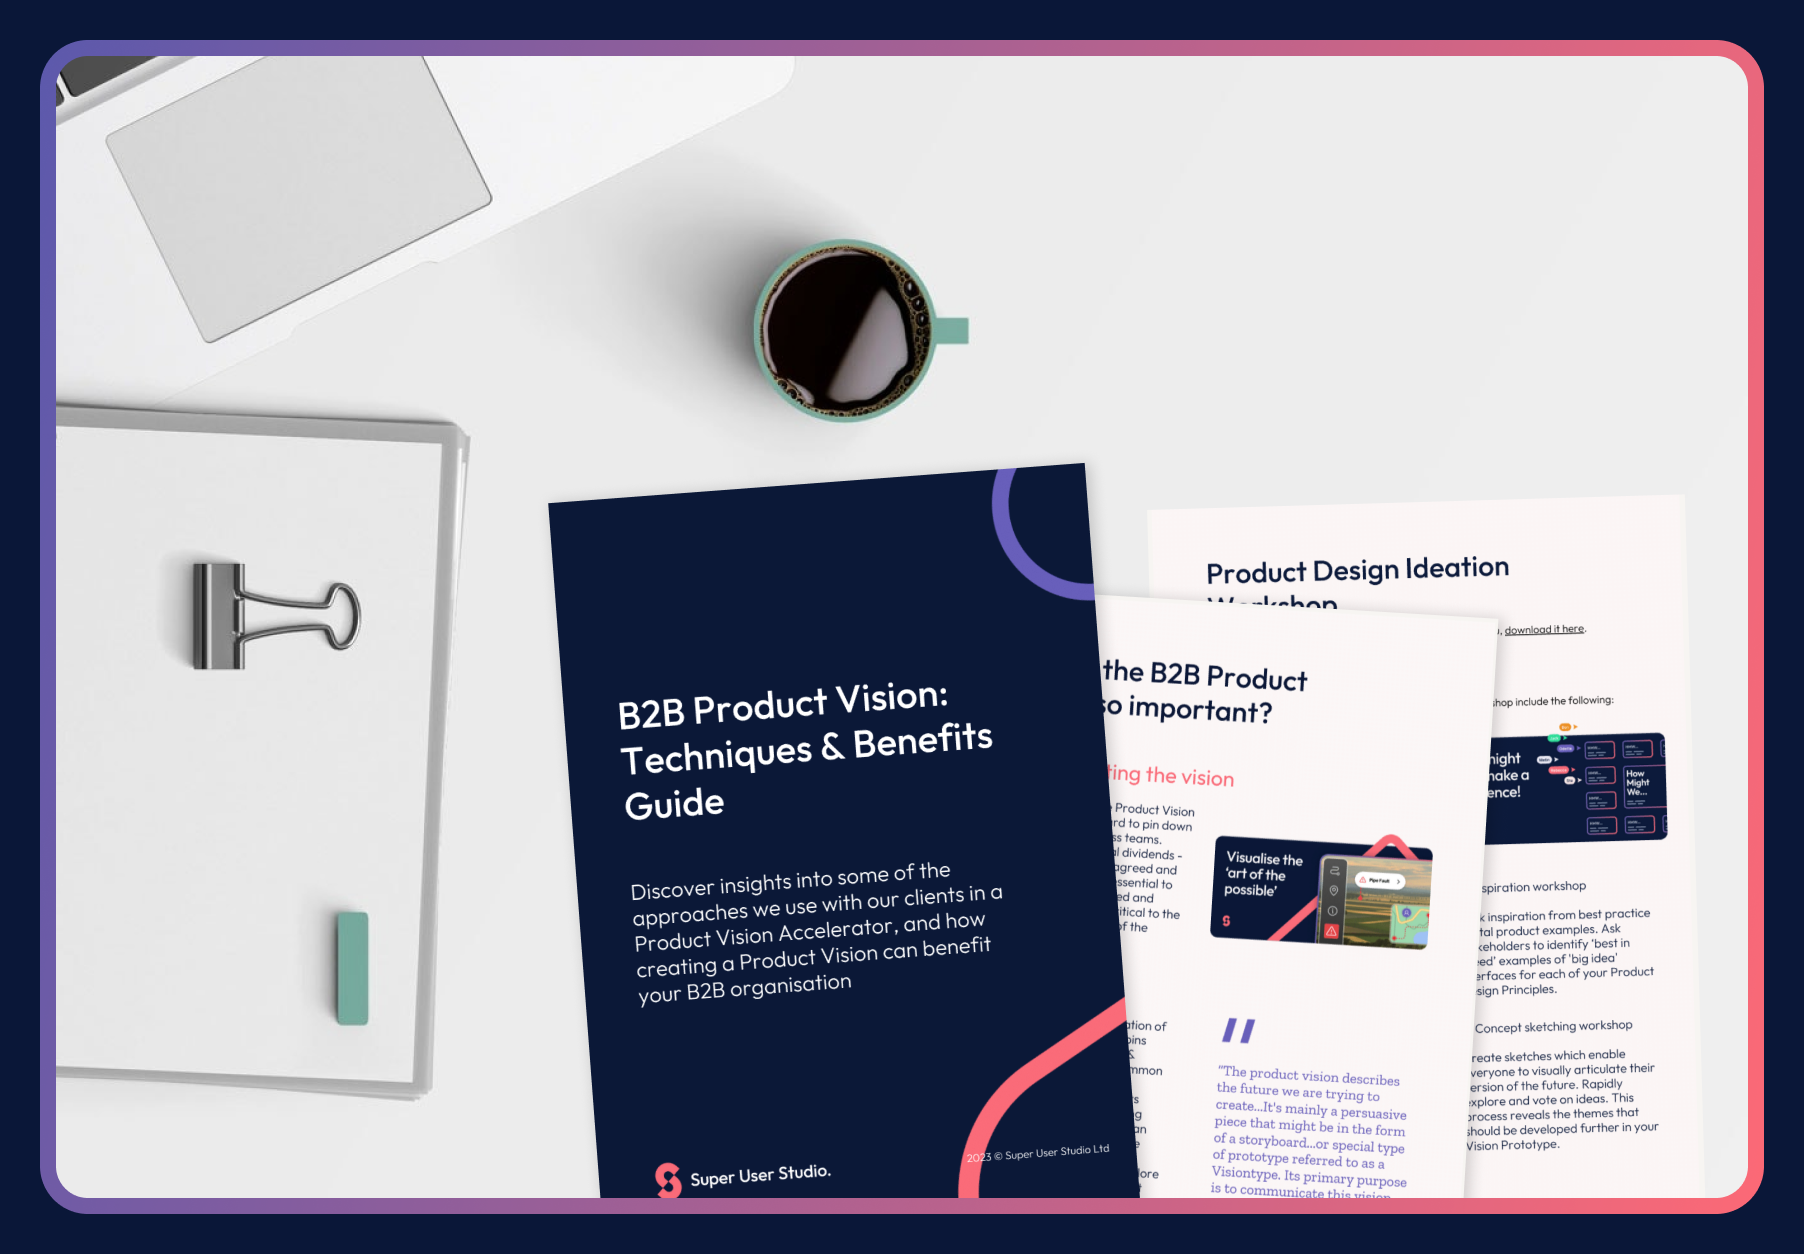 PVA Product Vision Techniques and Benefits Guide